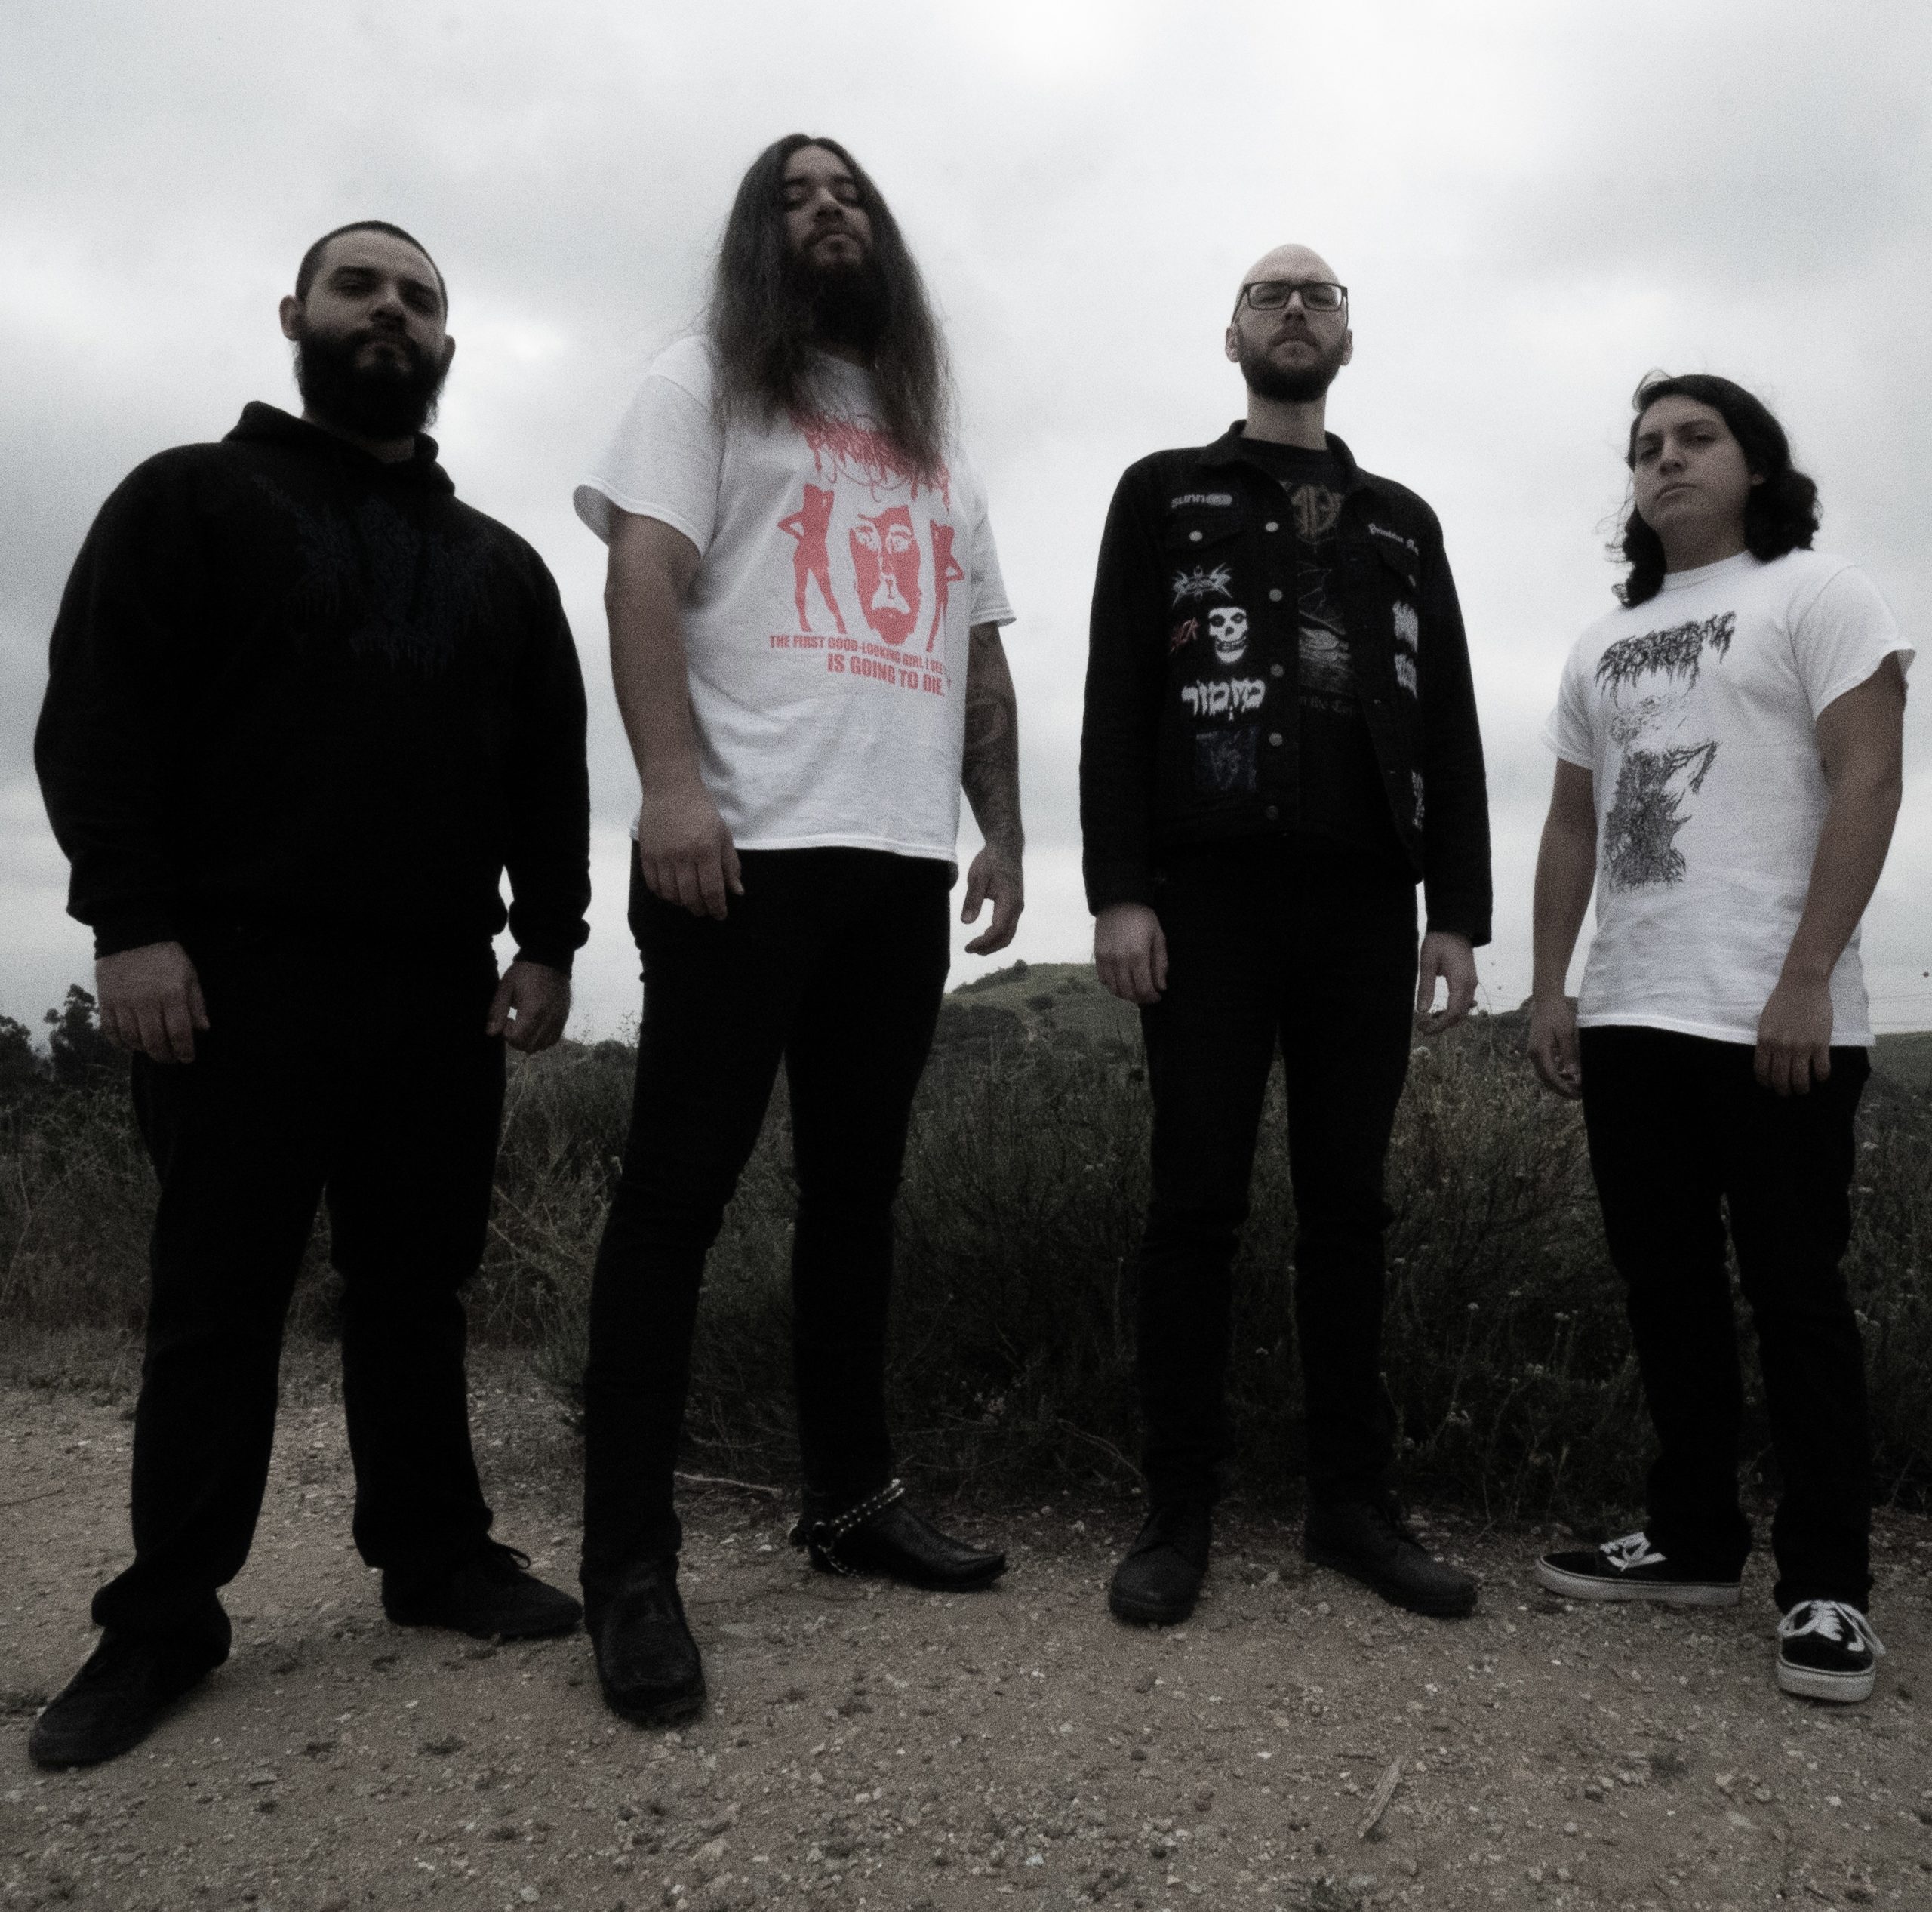 CIVEROUS: Invisible Oranges Premieres Decrepit Flesh Relic Debut From California Blackened Death Metal Practitioners; Record To See Release This Friday Via Transylvanian Recordings